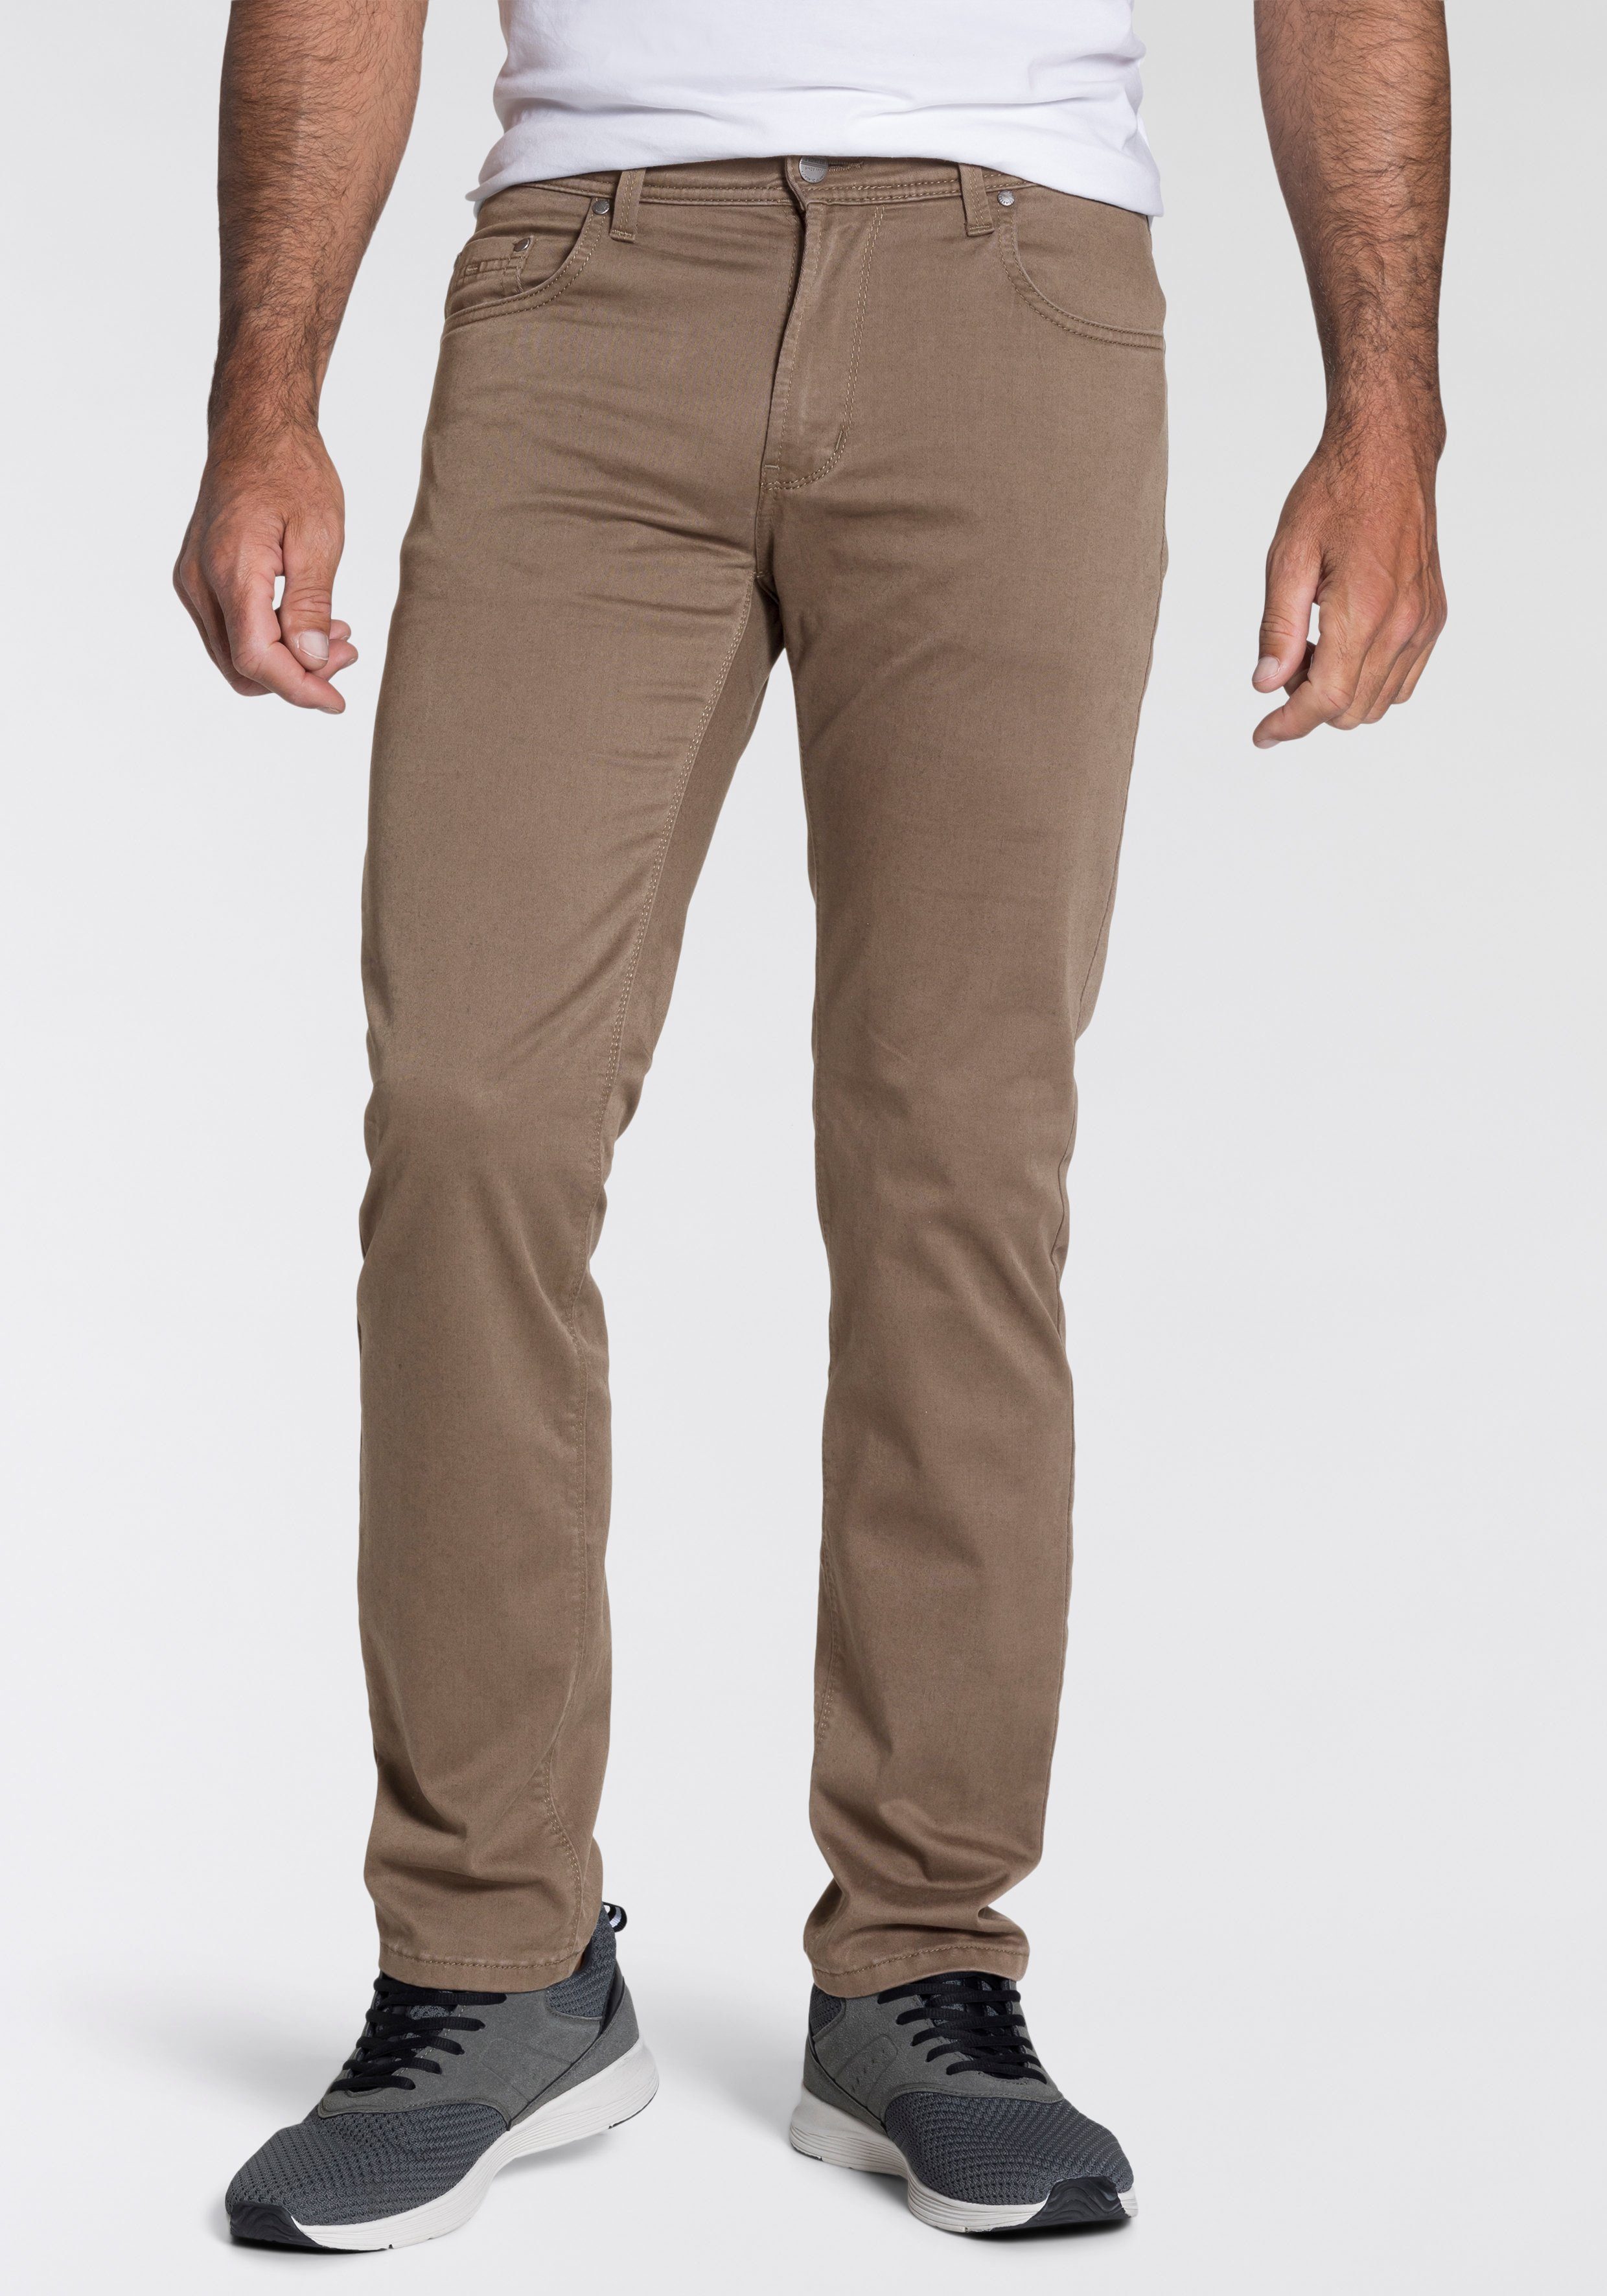 Pioneer Authentic Jeans 5-Pocket-Hose Rando Thermolite deep taupe